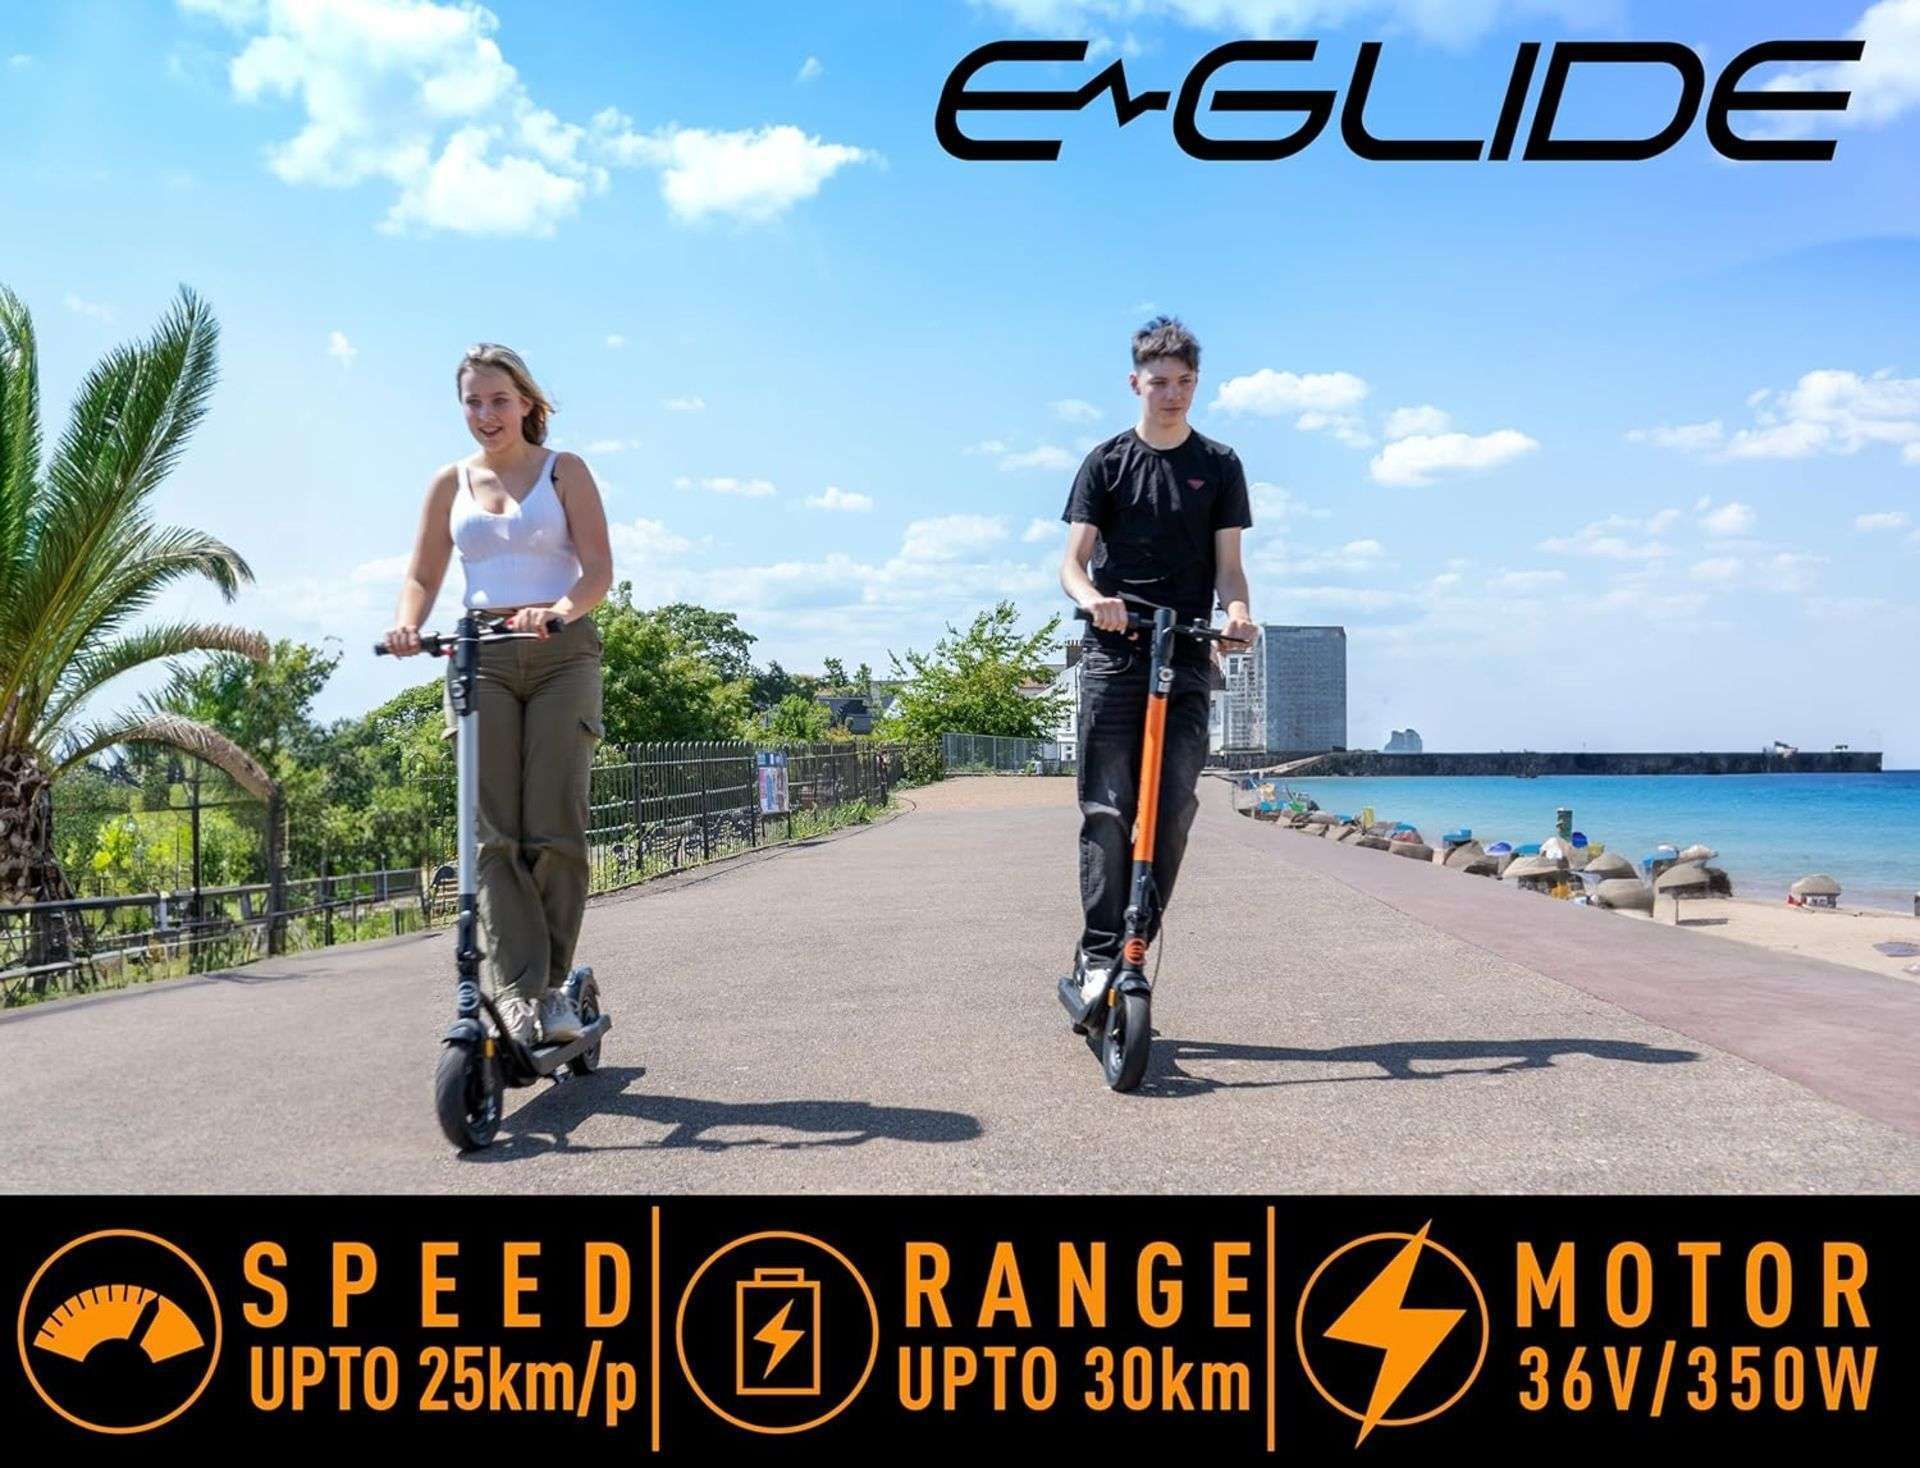 Brand New E-Glide V2 Electric Scooter Grey and Black RRP £599, Introducing a sleek and efficient - Image 3 of 4